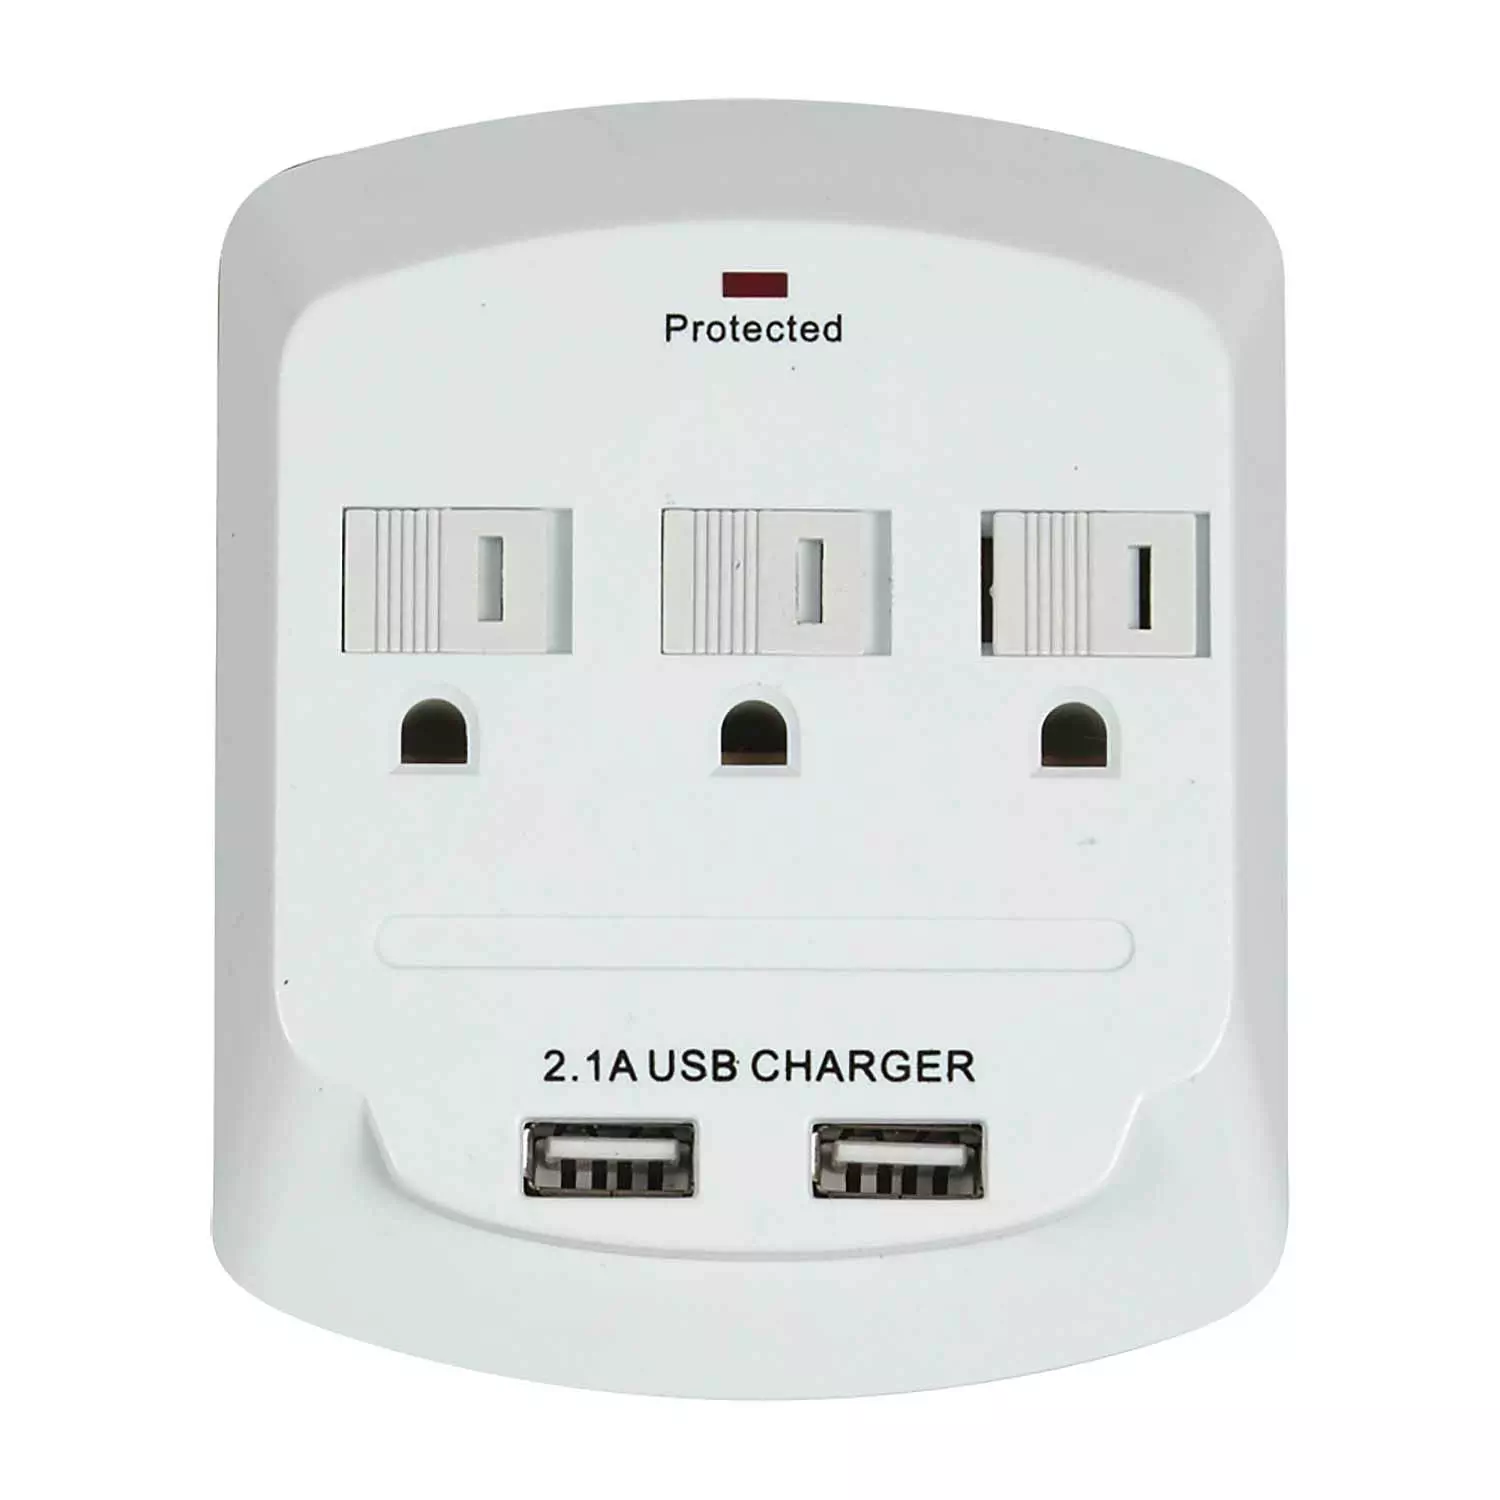 Eclipse Pro - Mobile home/office wall power outlet with USB ports